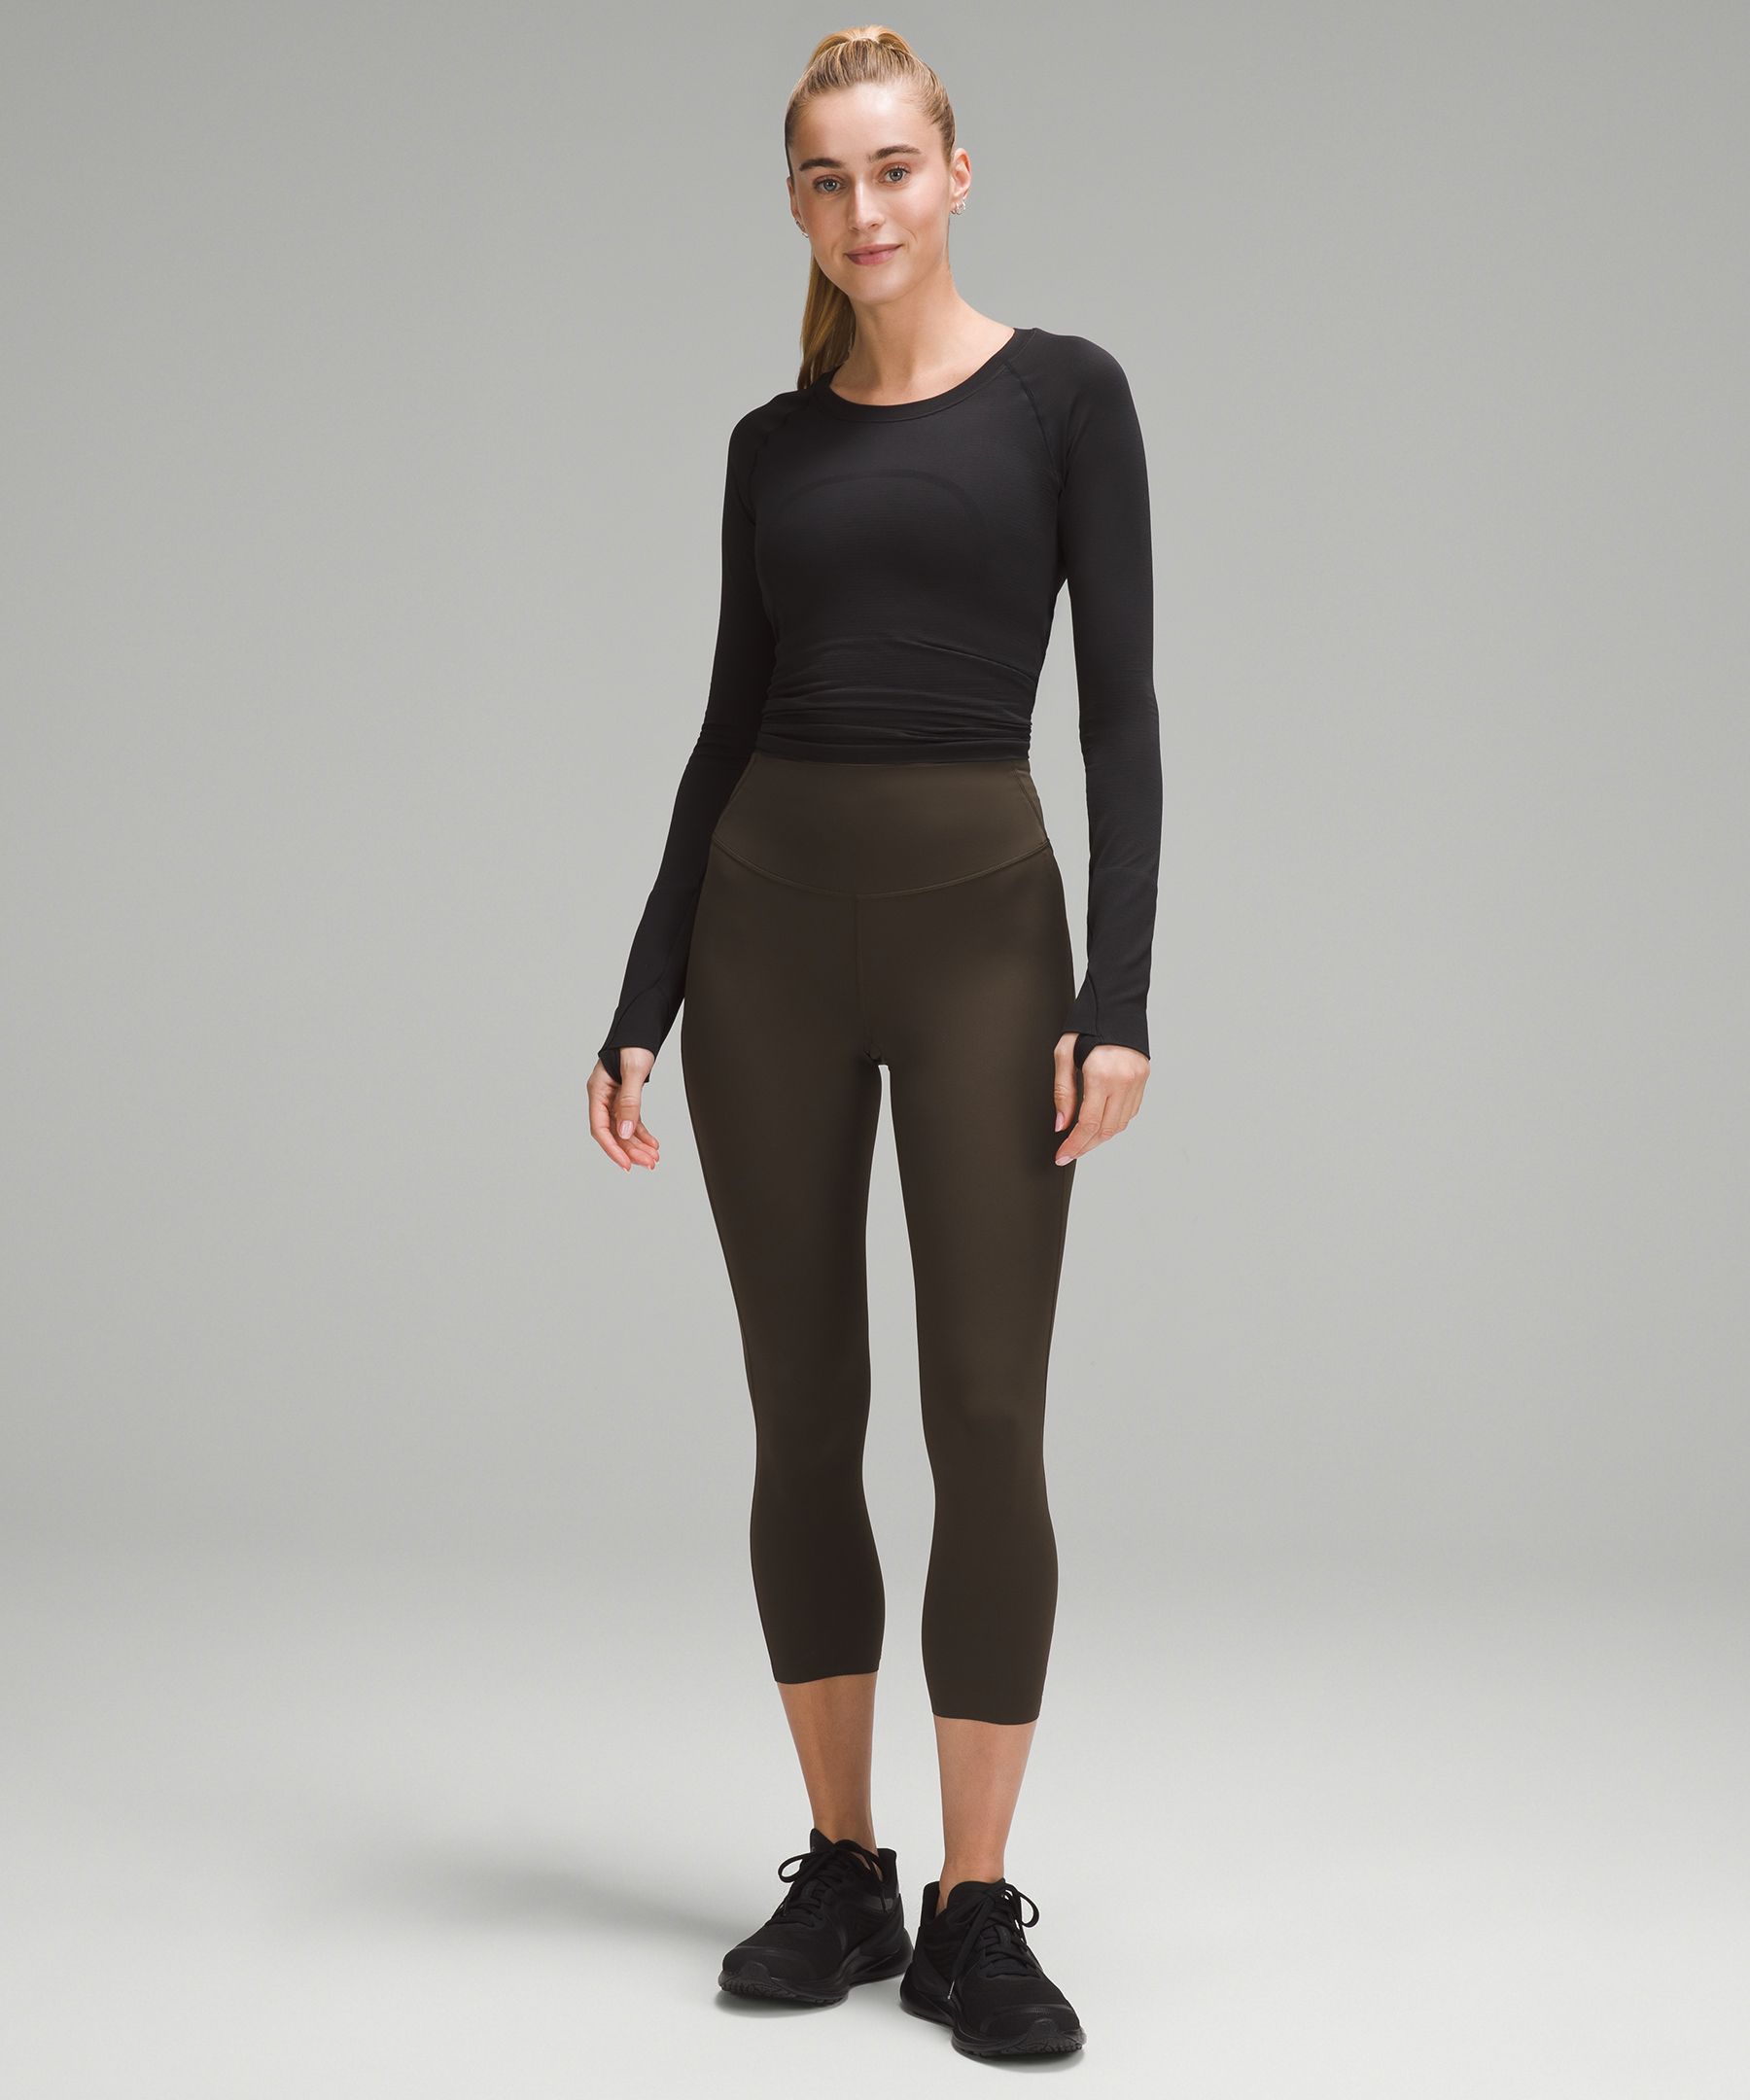 Lululemon athletica Base Pace High-Rise Tight 25 *Two-Tone Ribbed, Women's Leggings/Tights